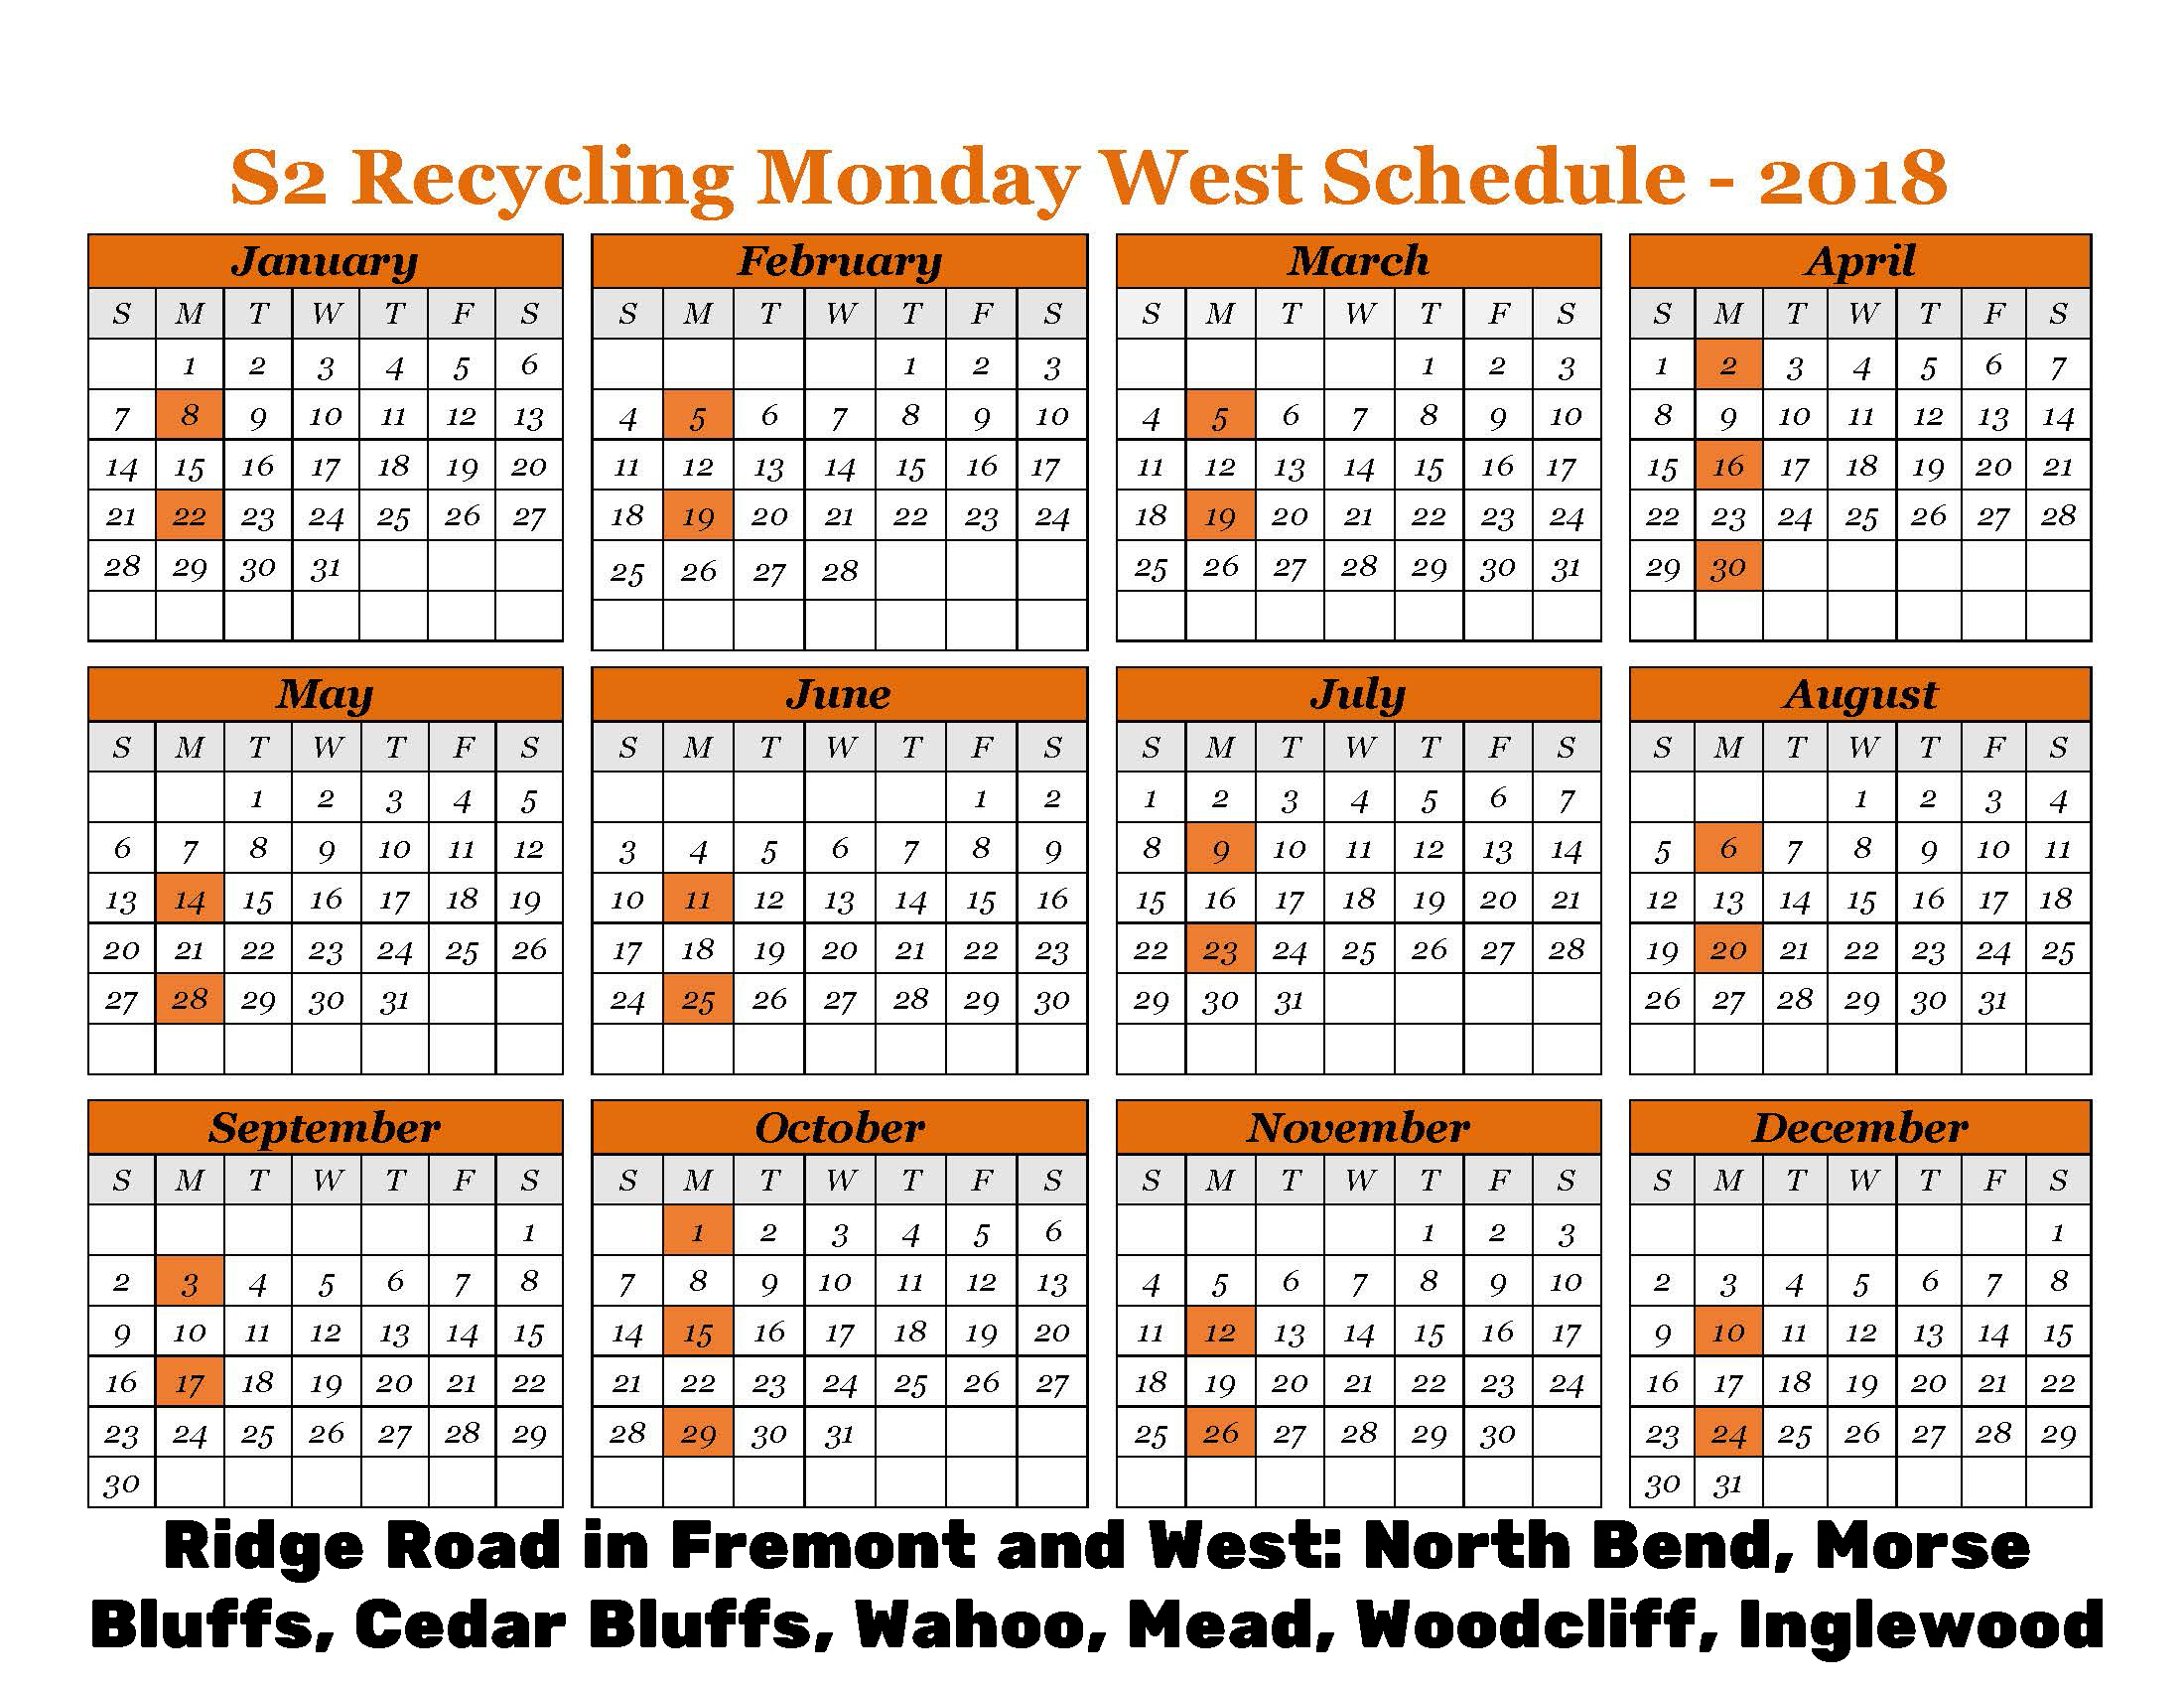 2018 Recycling Monday West Schudule